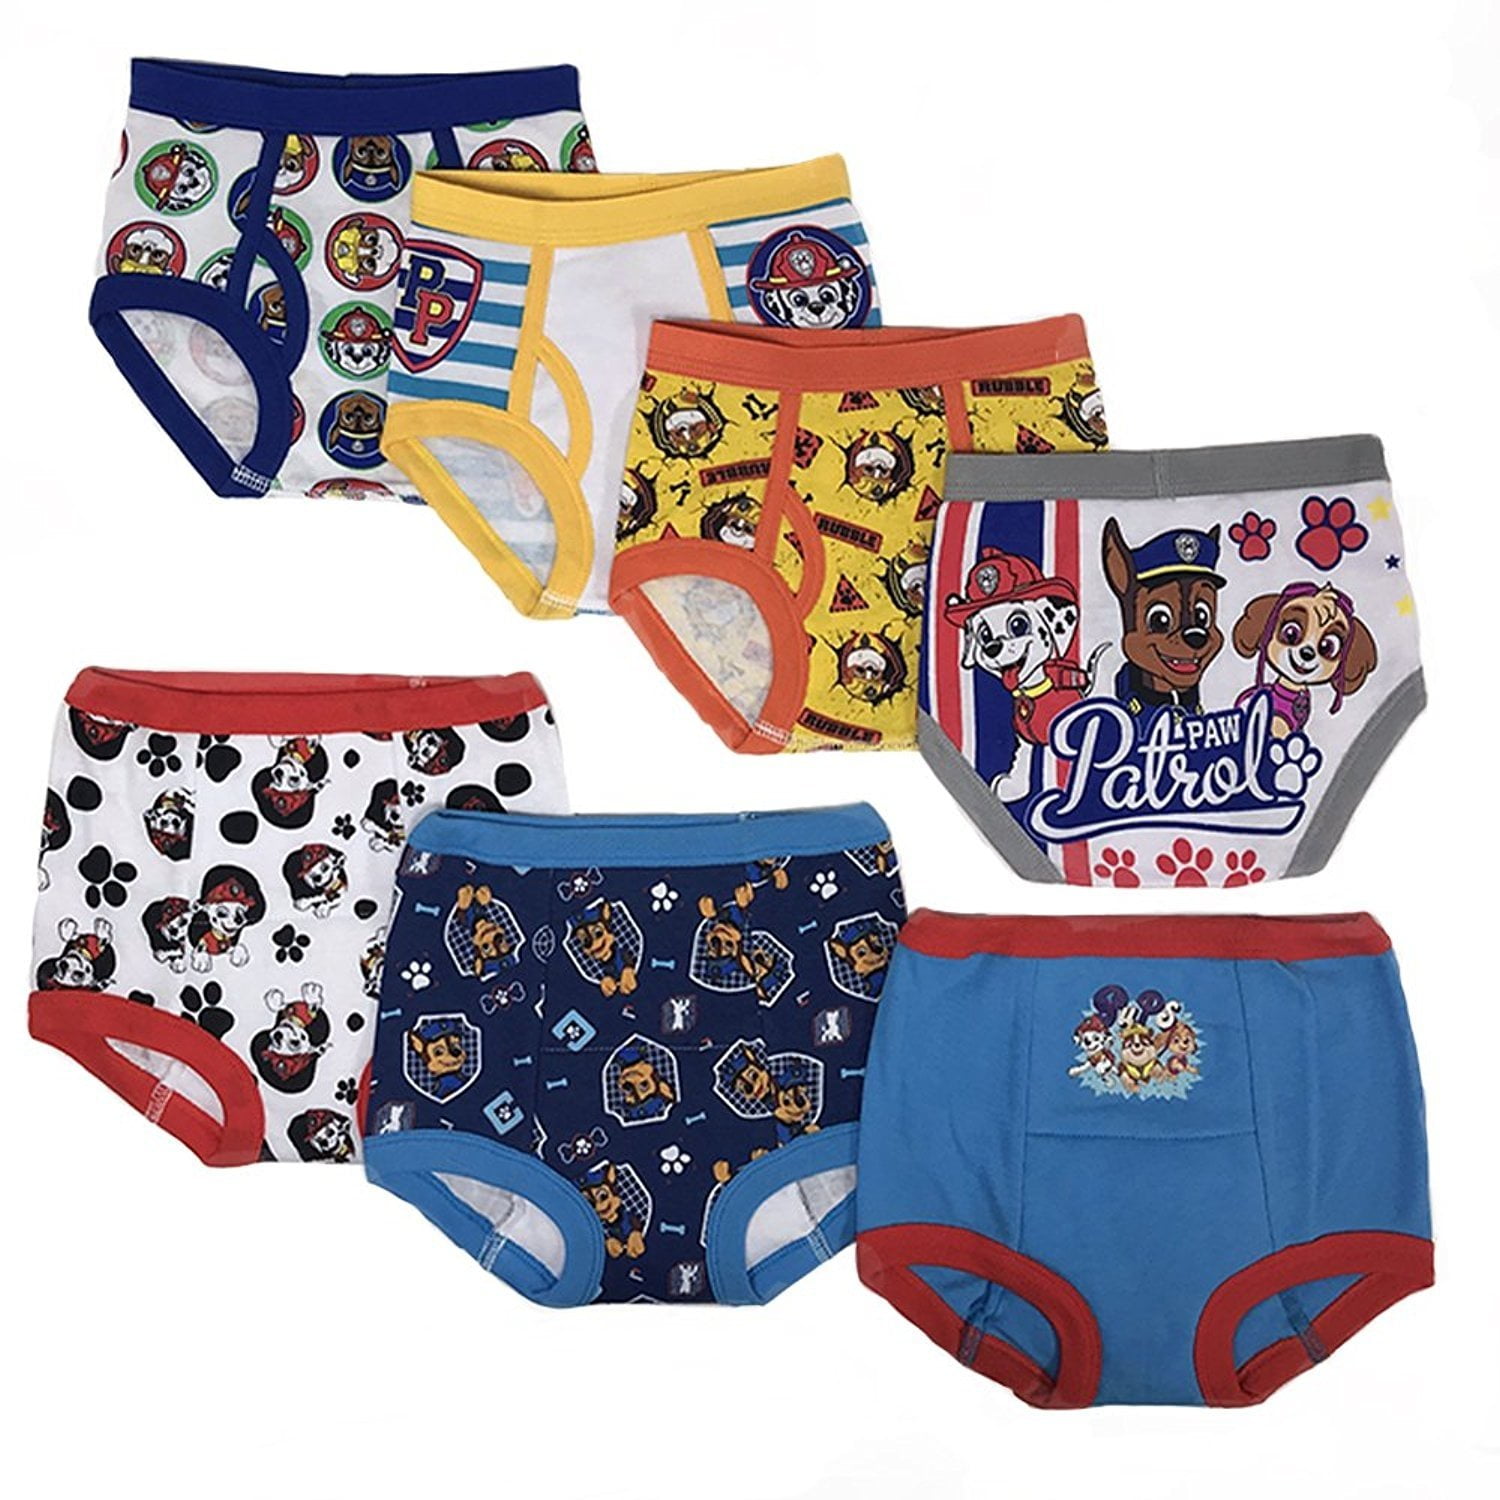 18 Months-5 Years PAW PATROL 100% Cotton Girl's Briefs/Knickers x 6 Pairs